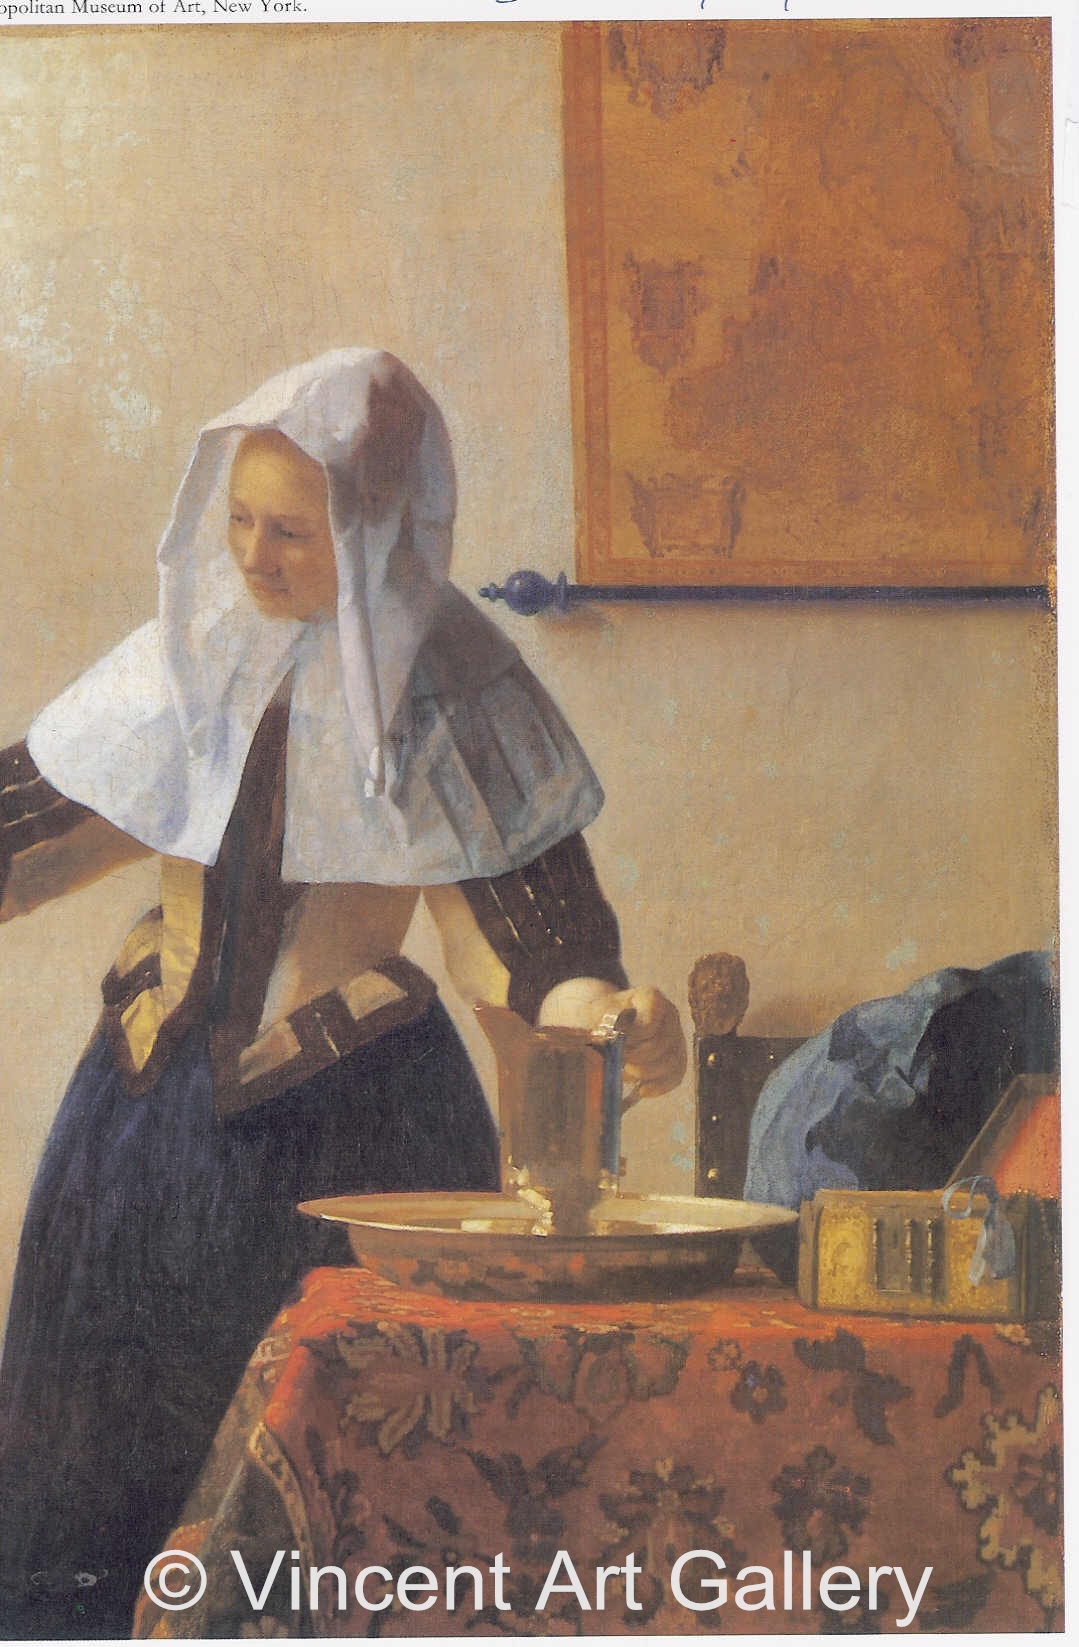 A113, VERMEER, Woman with a Water Jug, Right Part